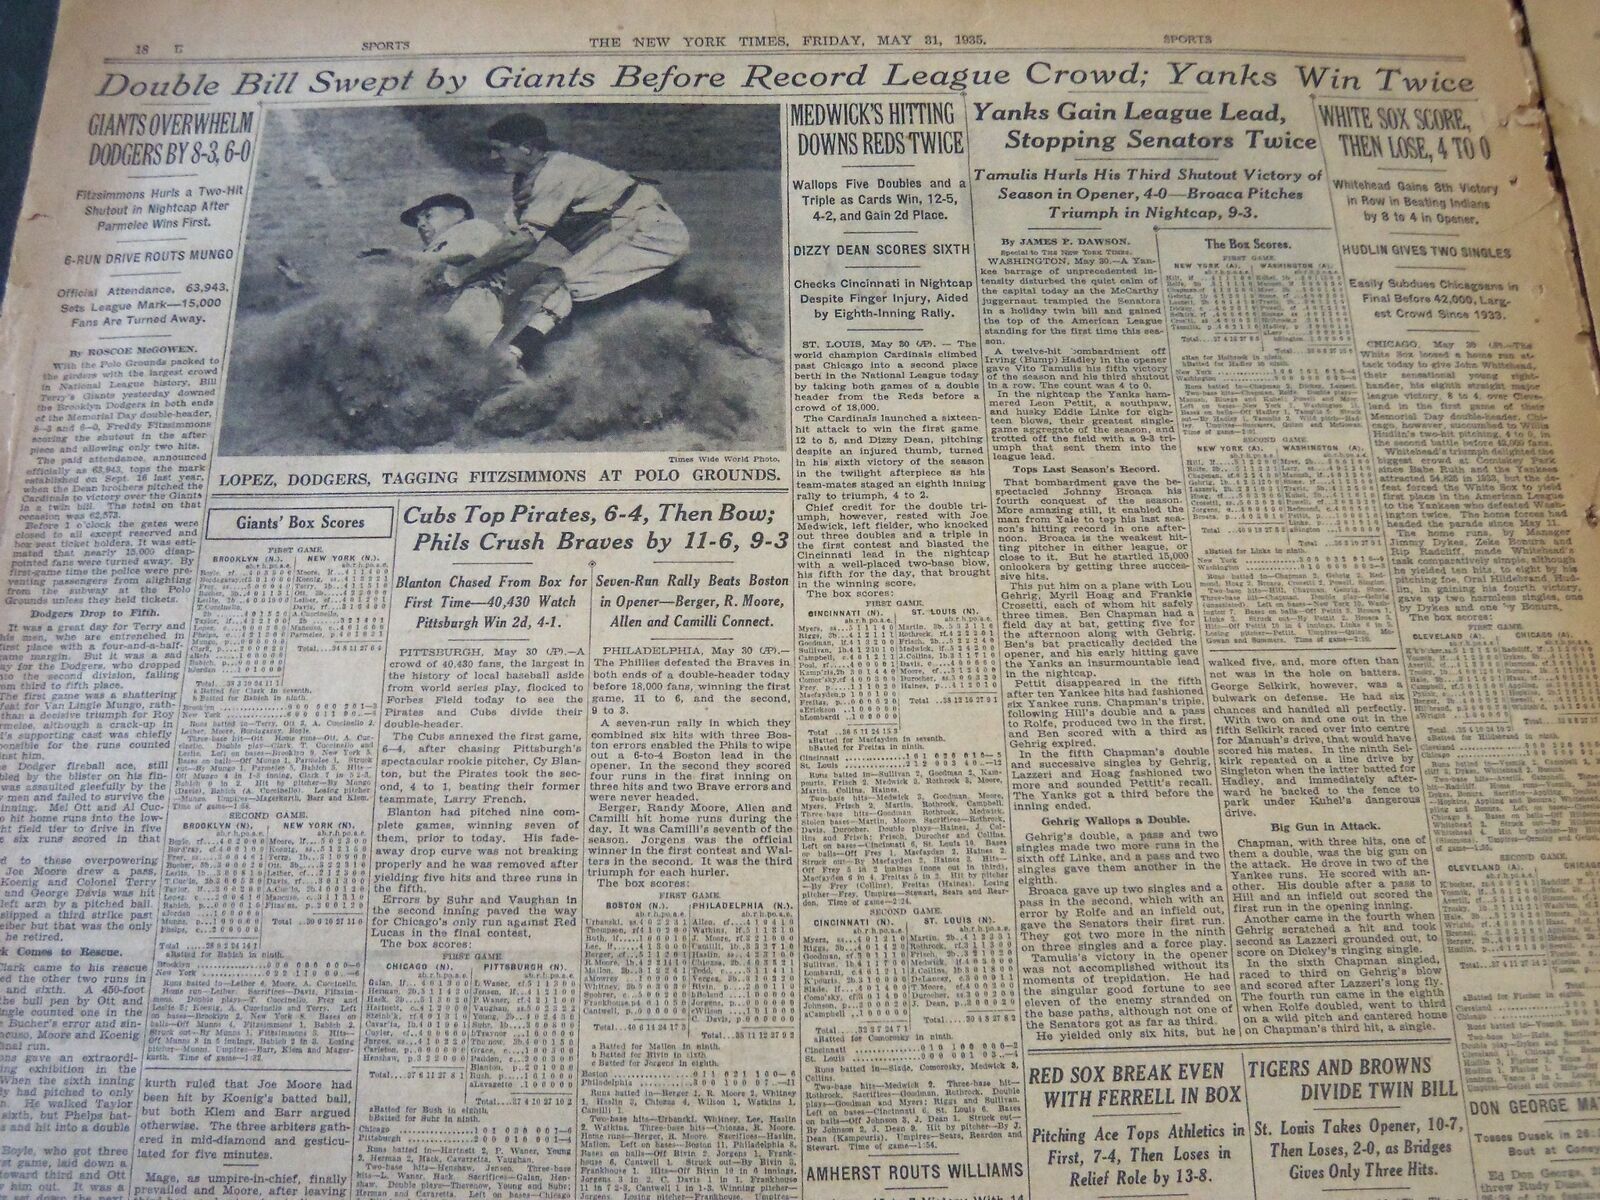 1935 MAY 31 NEW YORK TIMES - BABE RUTH'S LAST GAME - NT 5916